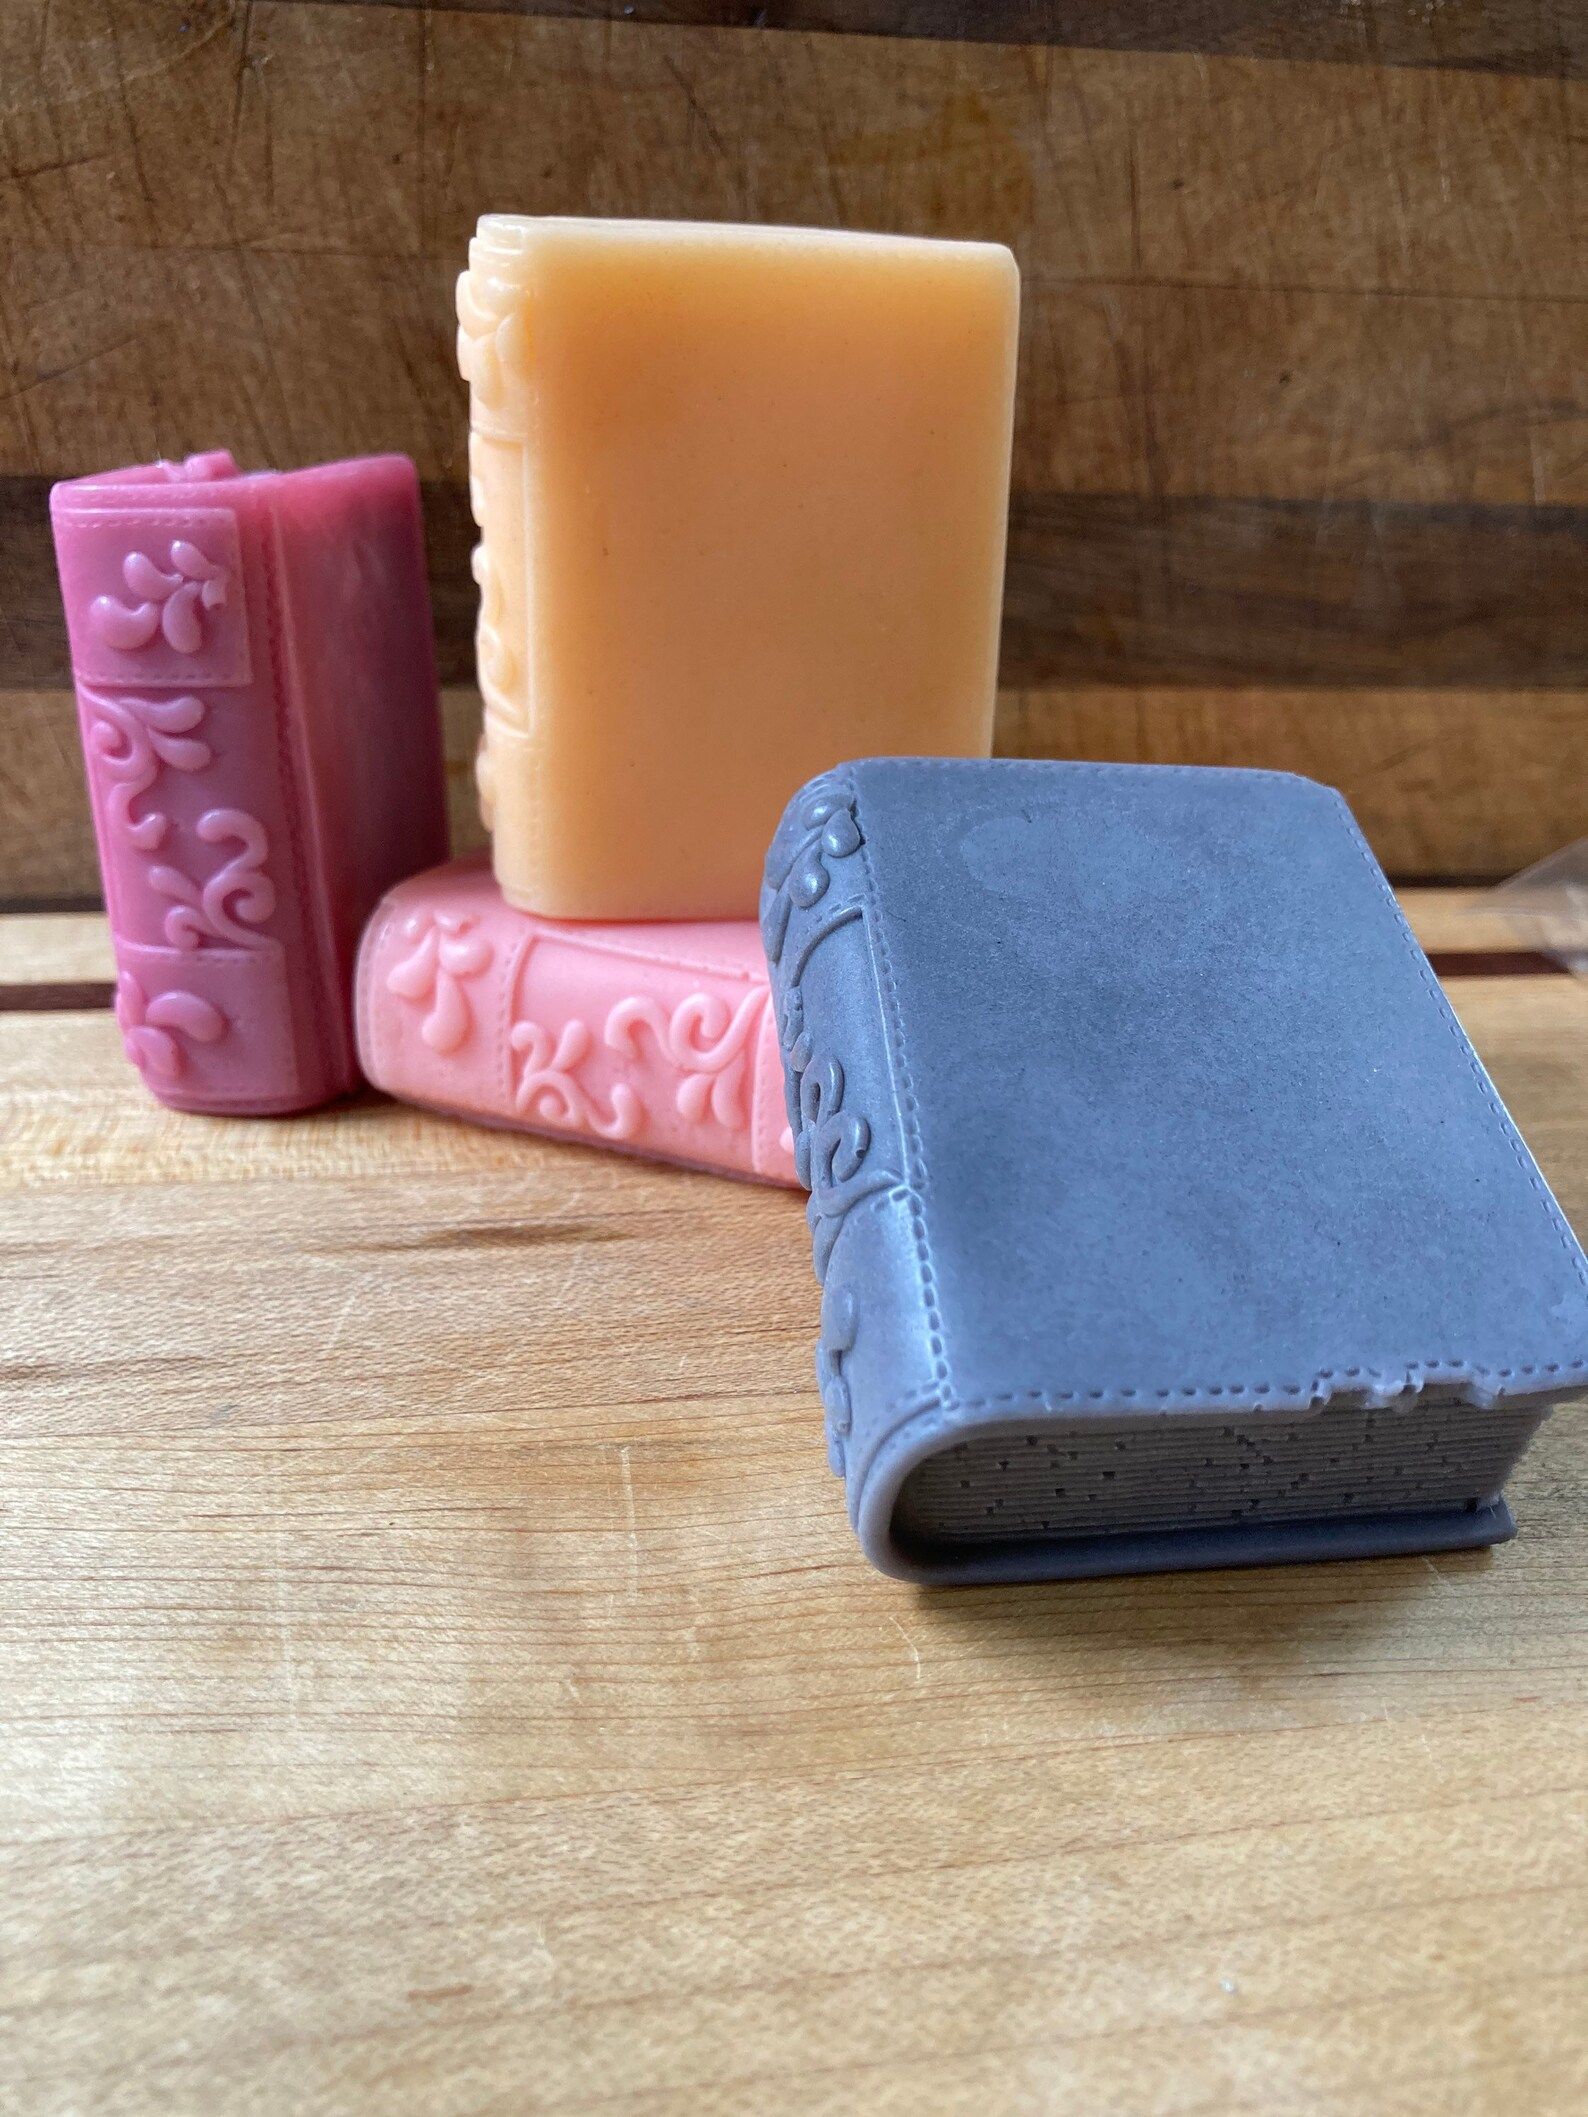 four bars of soap in the shape of leather-bound books